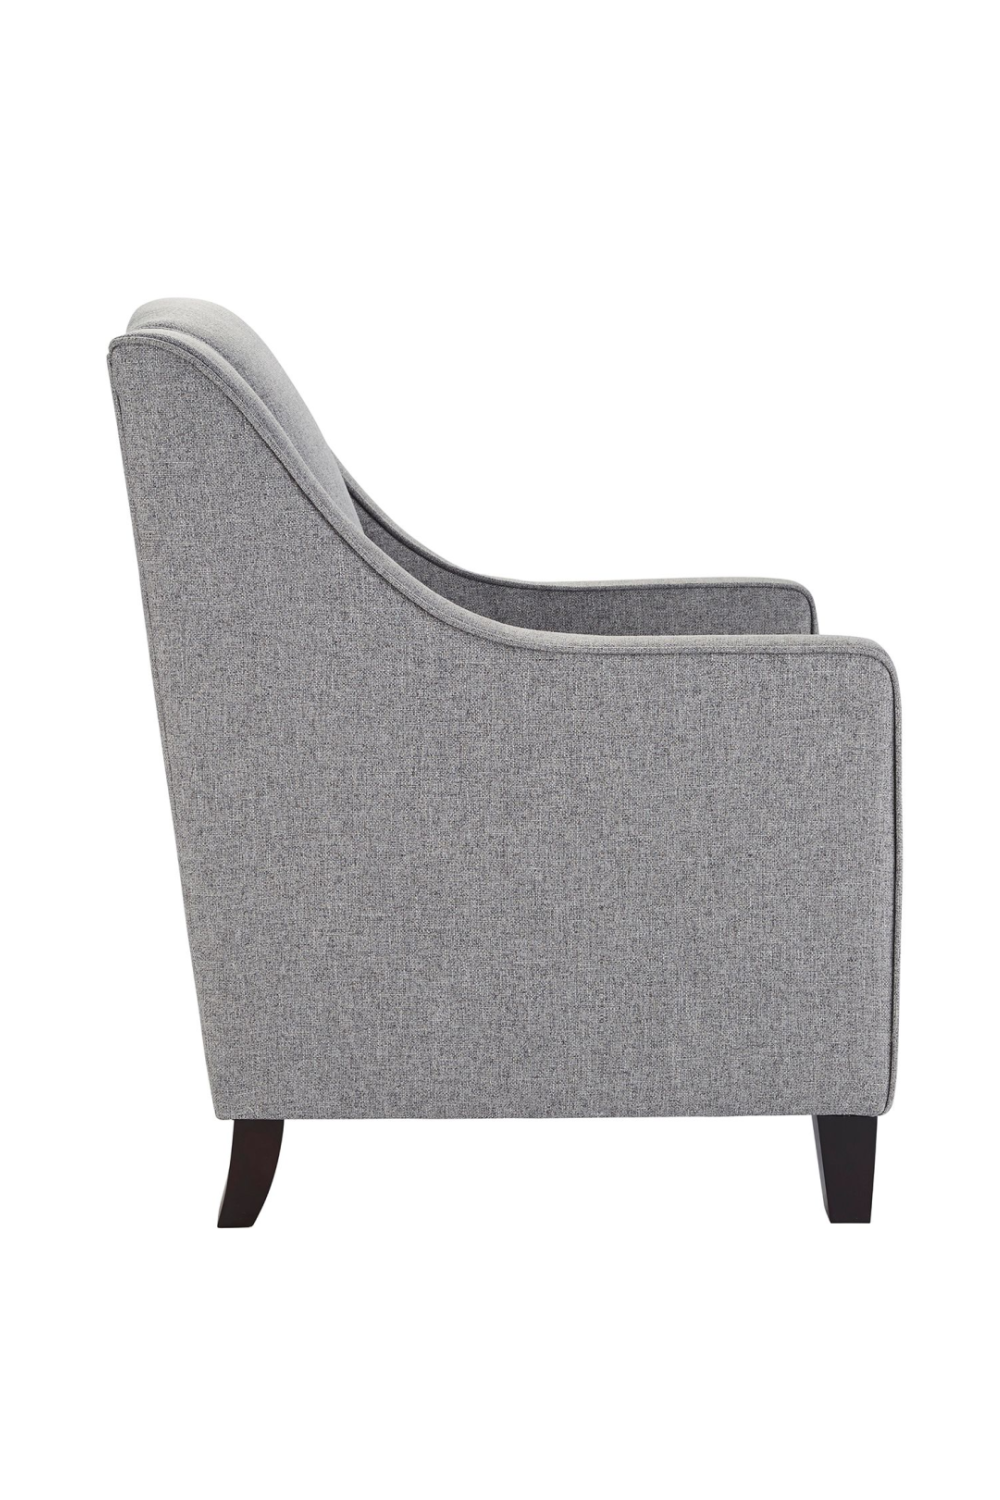 Gray Upholstery Curved Arms Chair | Andrew Martin Finbar | OROA